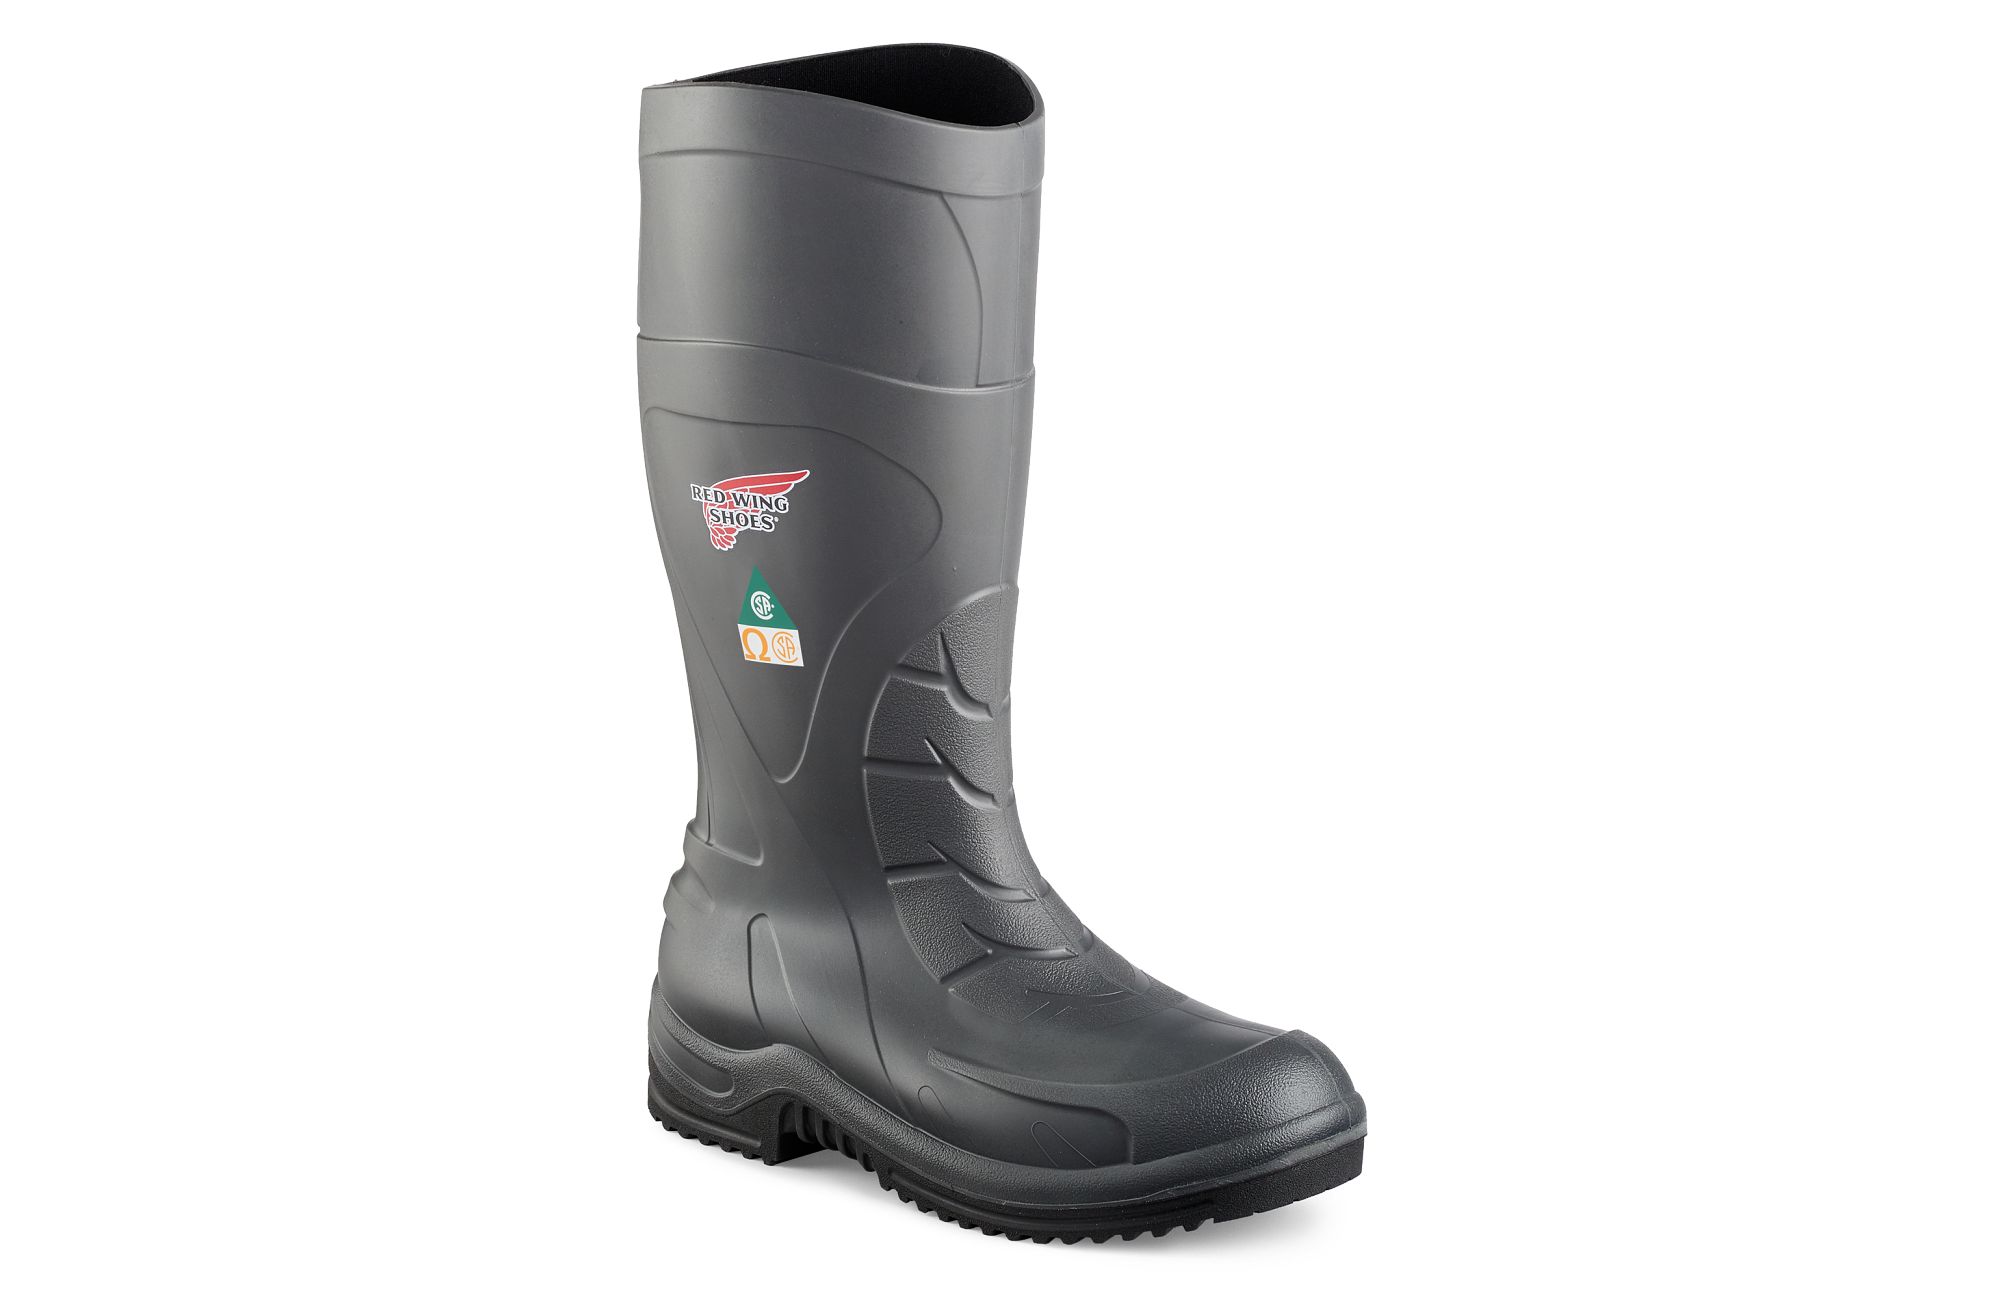 Men's Canadian-made Waterproof Rubber Rain Boots, Black with Red Sole